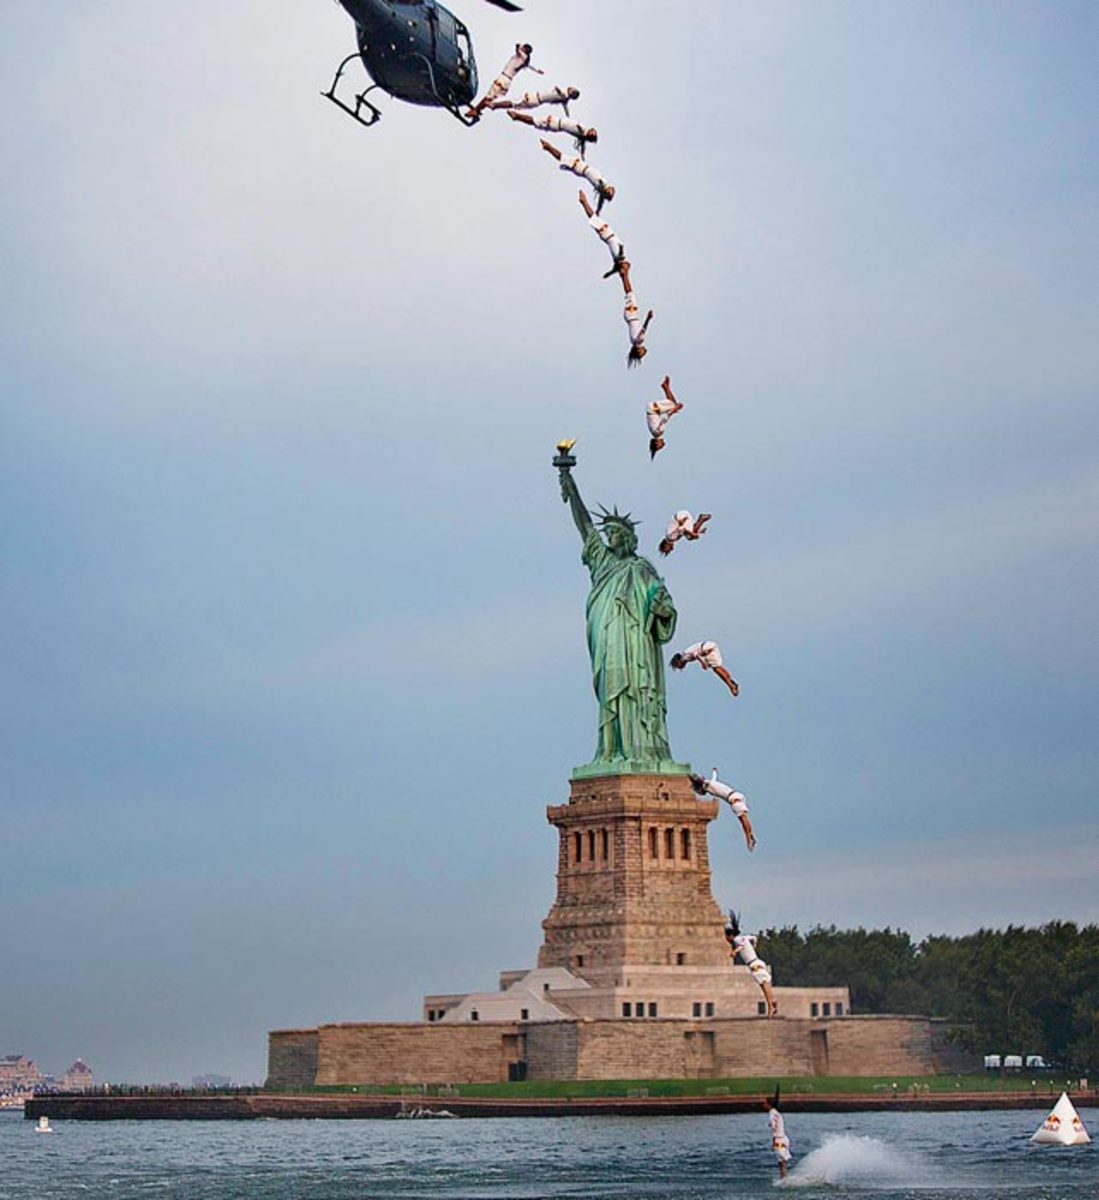 130823123530-red-bull-cliff-diving---statue-of-liberty---2-single-image-cut.jpg